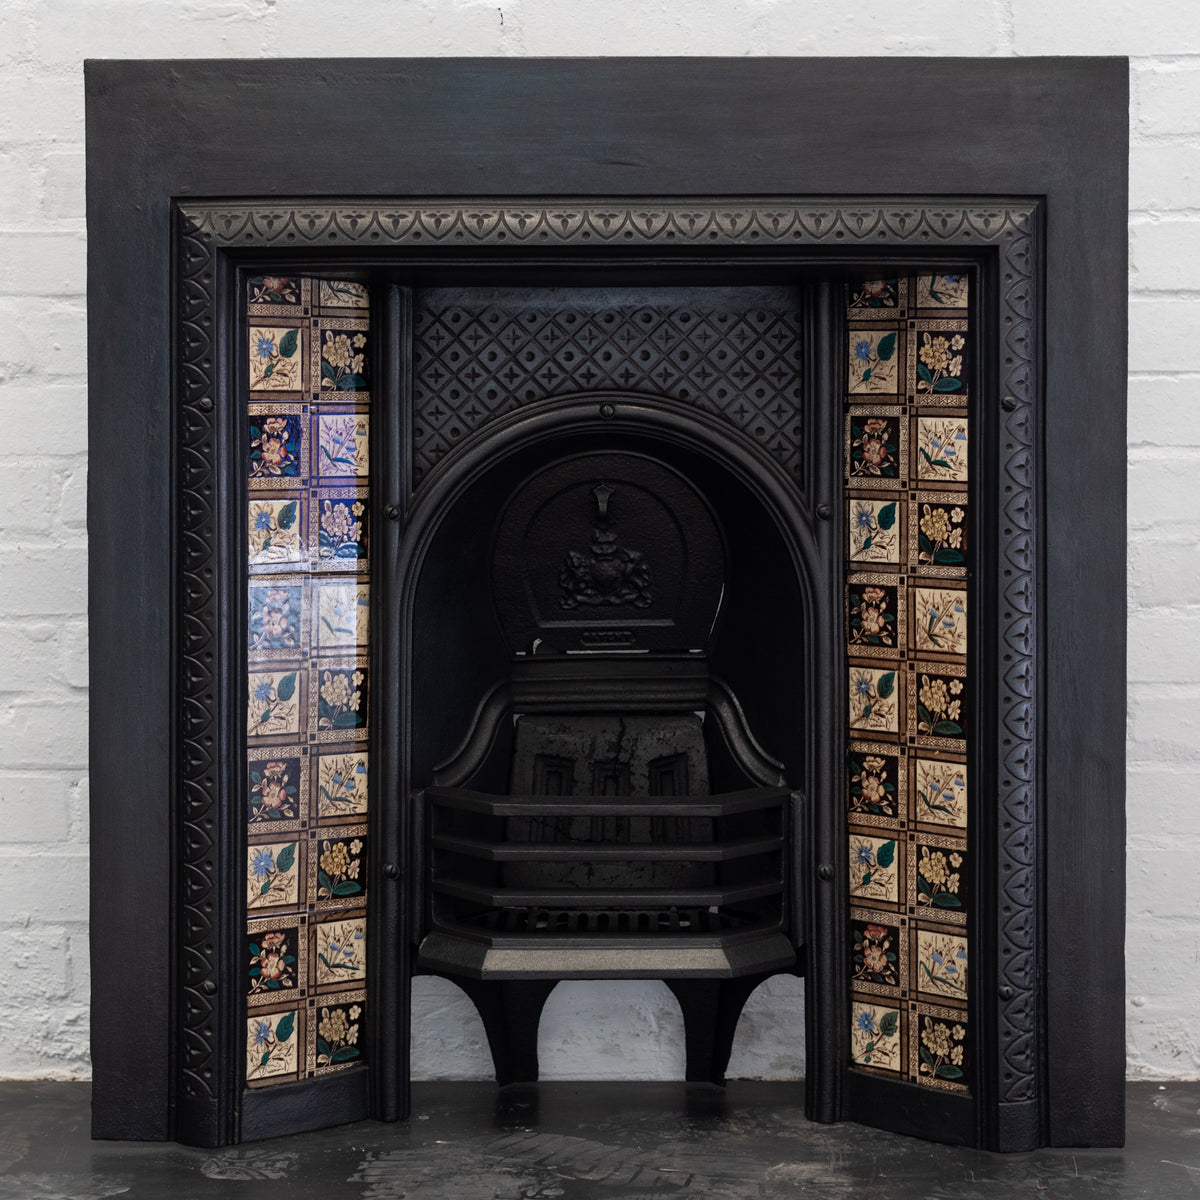 Antique Cast Iron Fireplace Insert with Original Tiles | The Architectural Forum